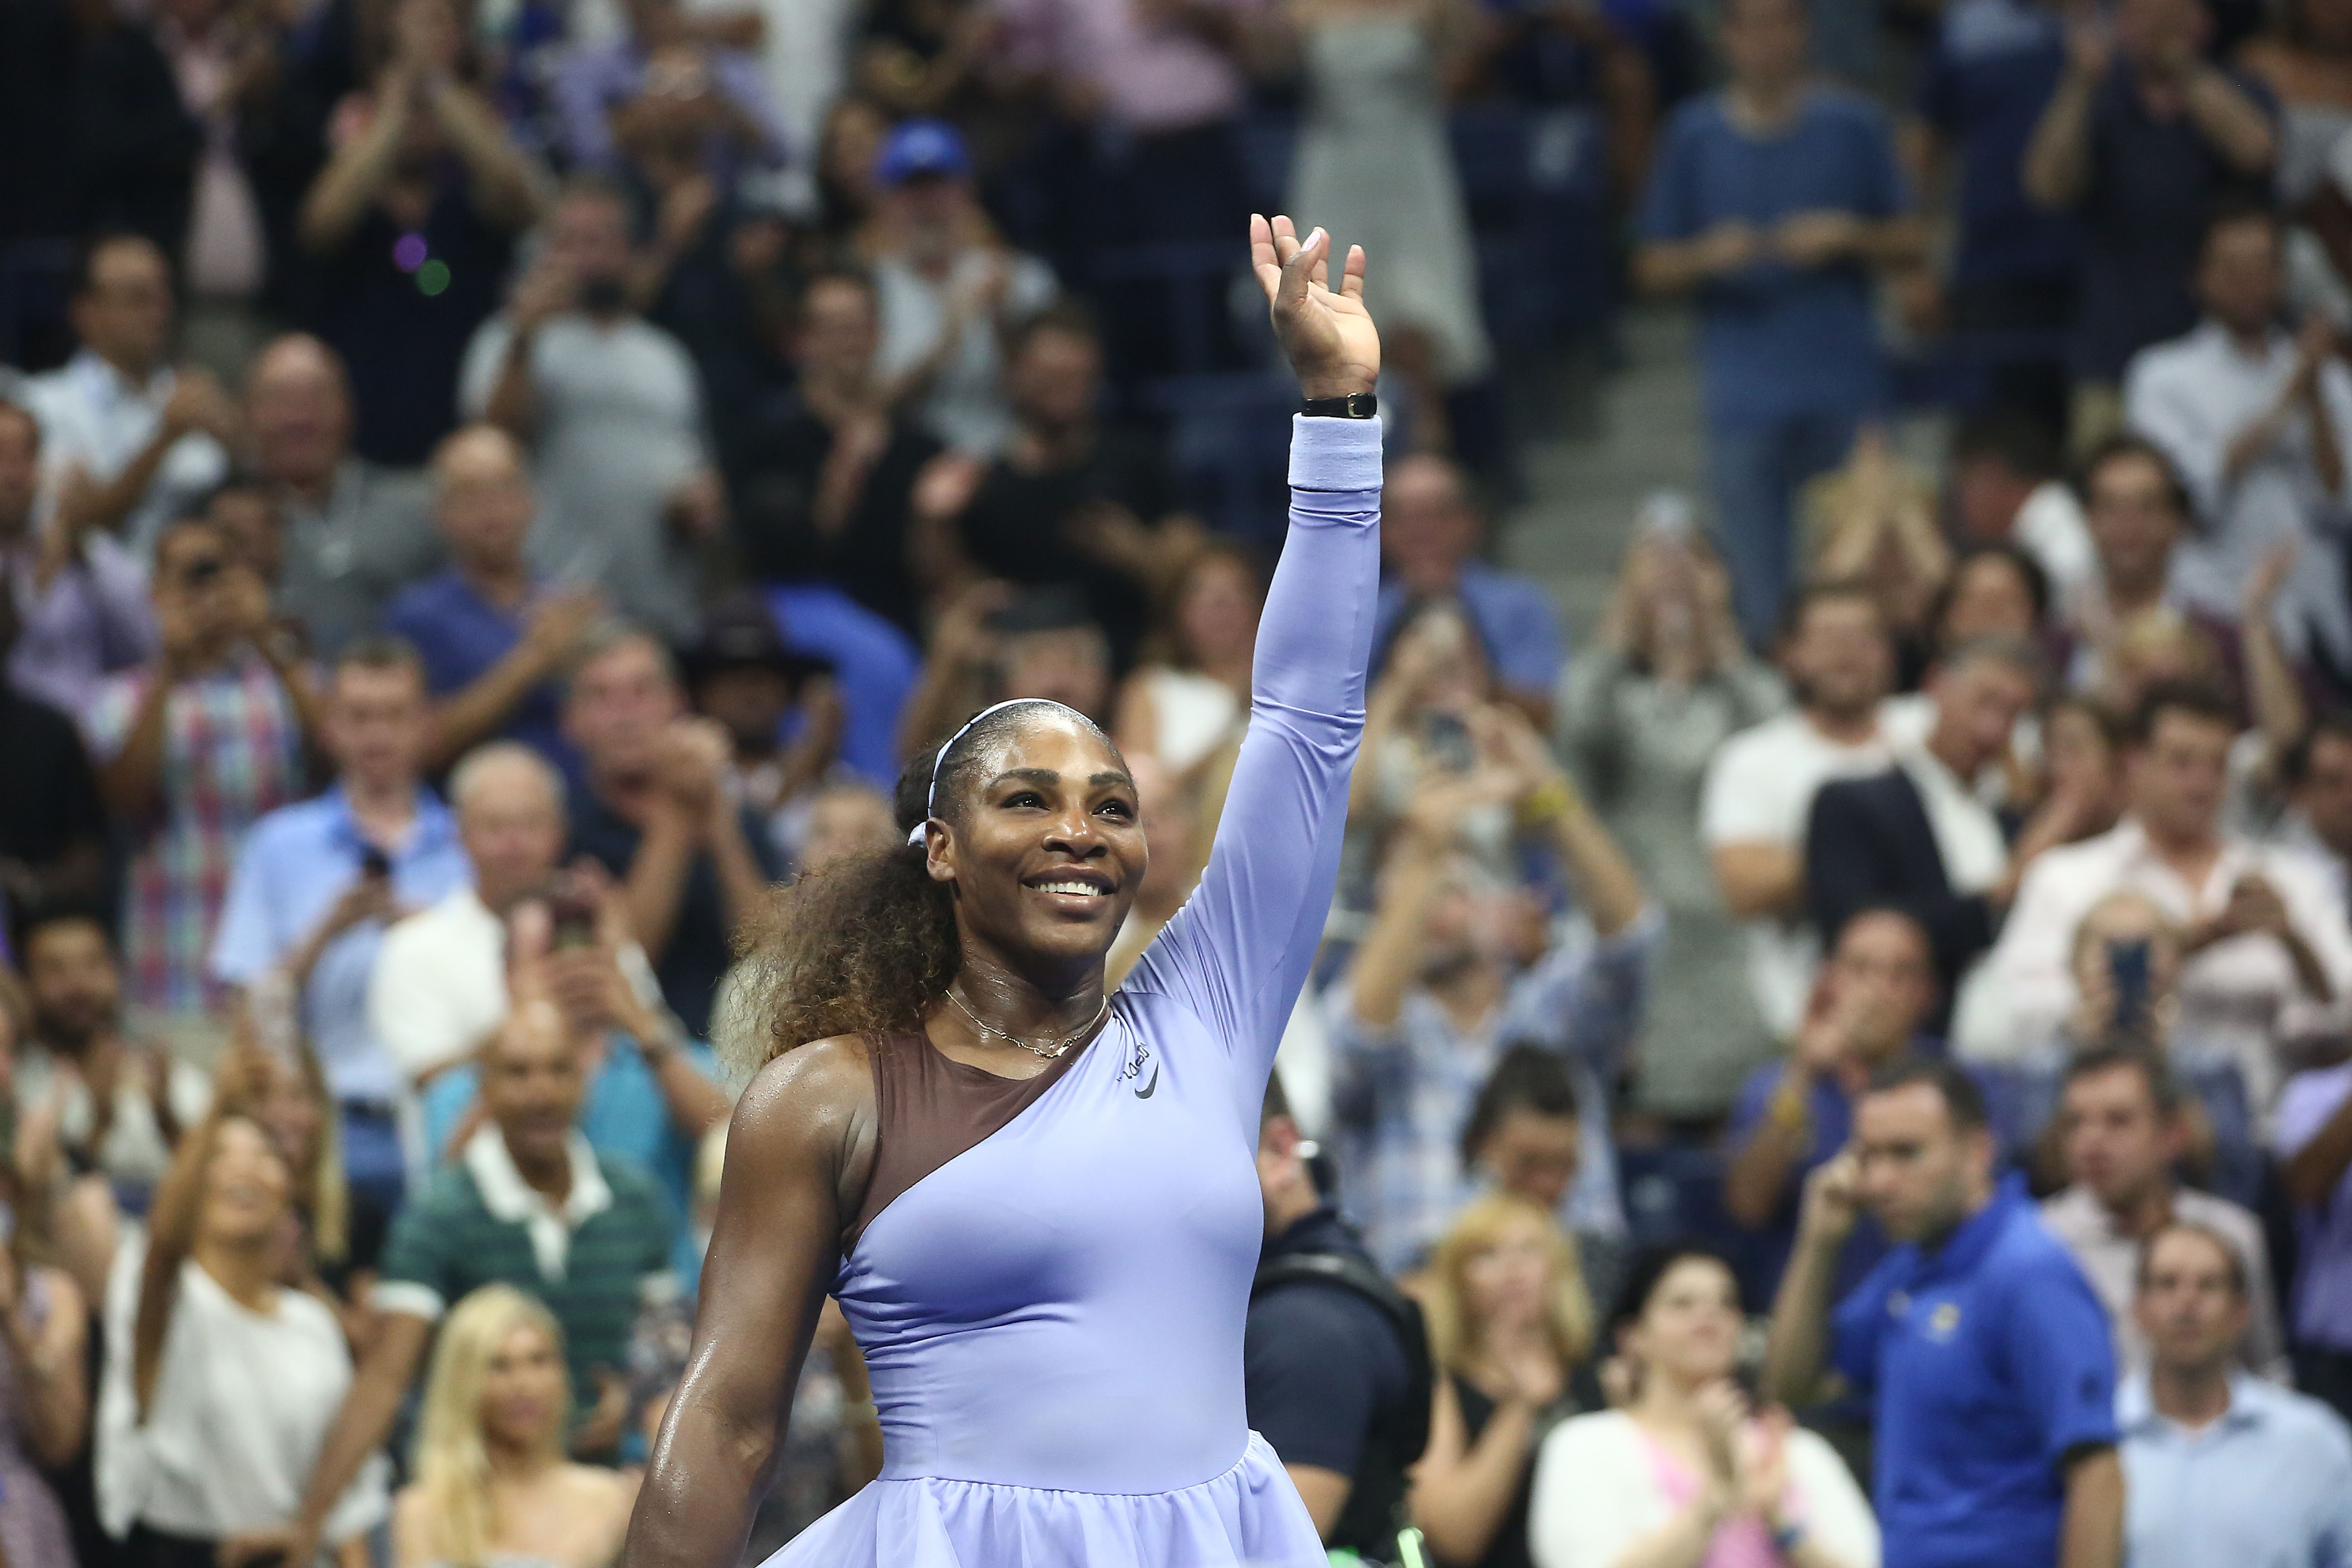 The Almighty GOAT Serena Williams Is Through To Her 9th US Open Final